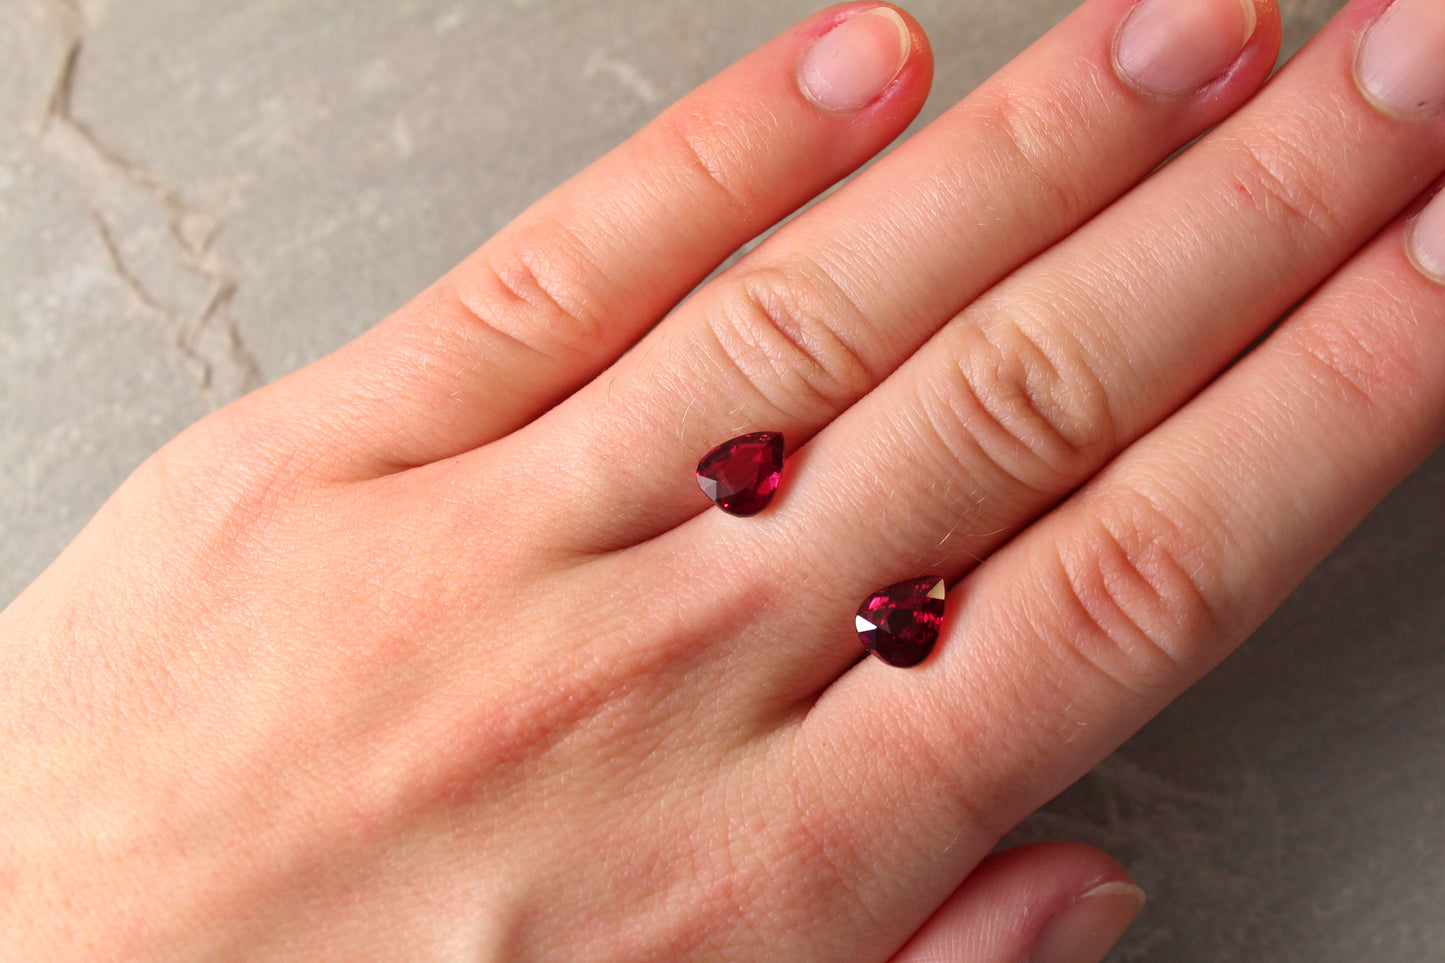 4.02ct Vivid Red, Pigeons' Blood, Pear Shape Ruby Pair, No Heat, Mozambique - 8.4 x 6.8mm